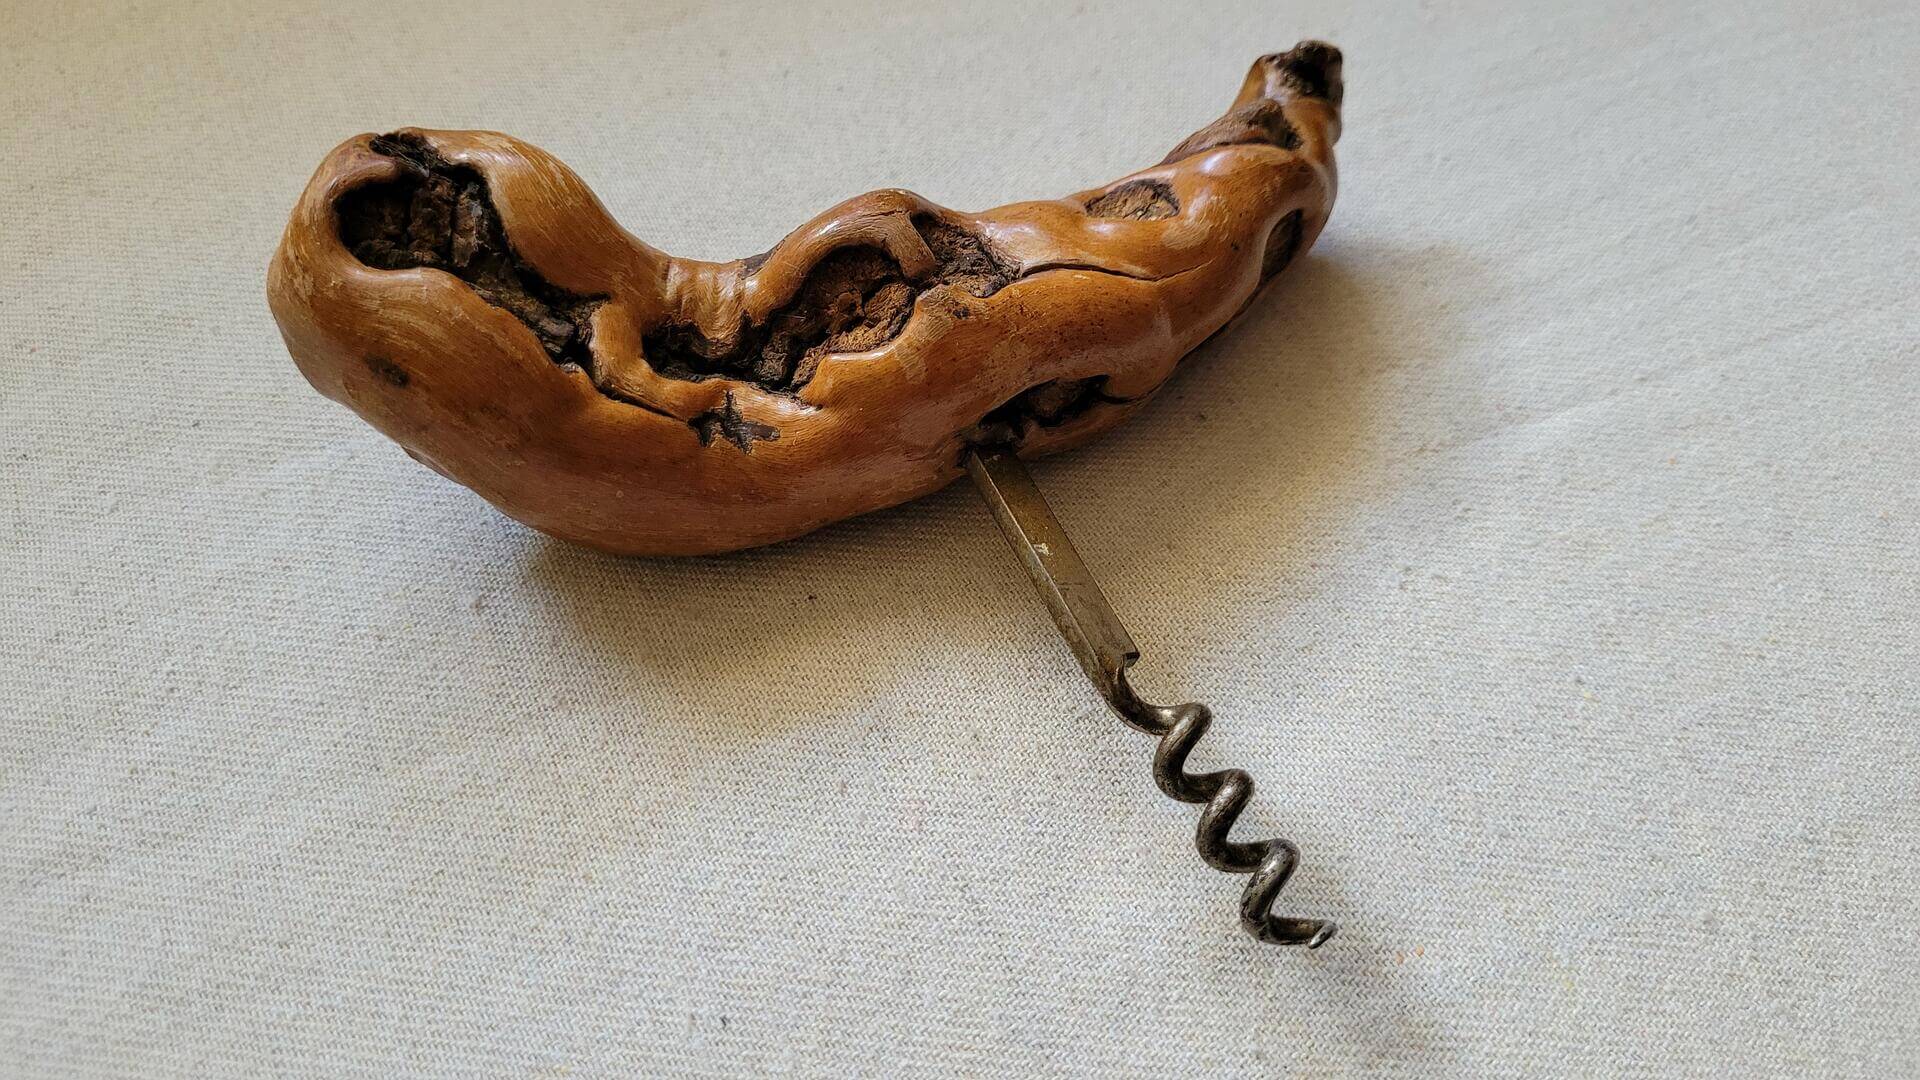 laurent-siret-rochefort-s-loire-grapevine-root-corkscrew-antique-vintage-made-in-france-breweriana-barware-collectible